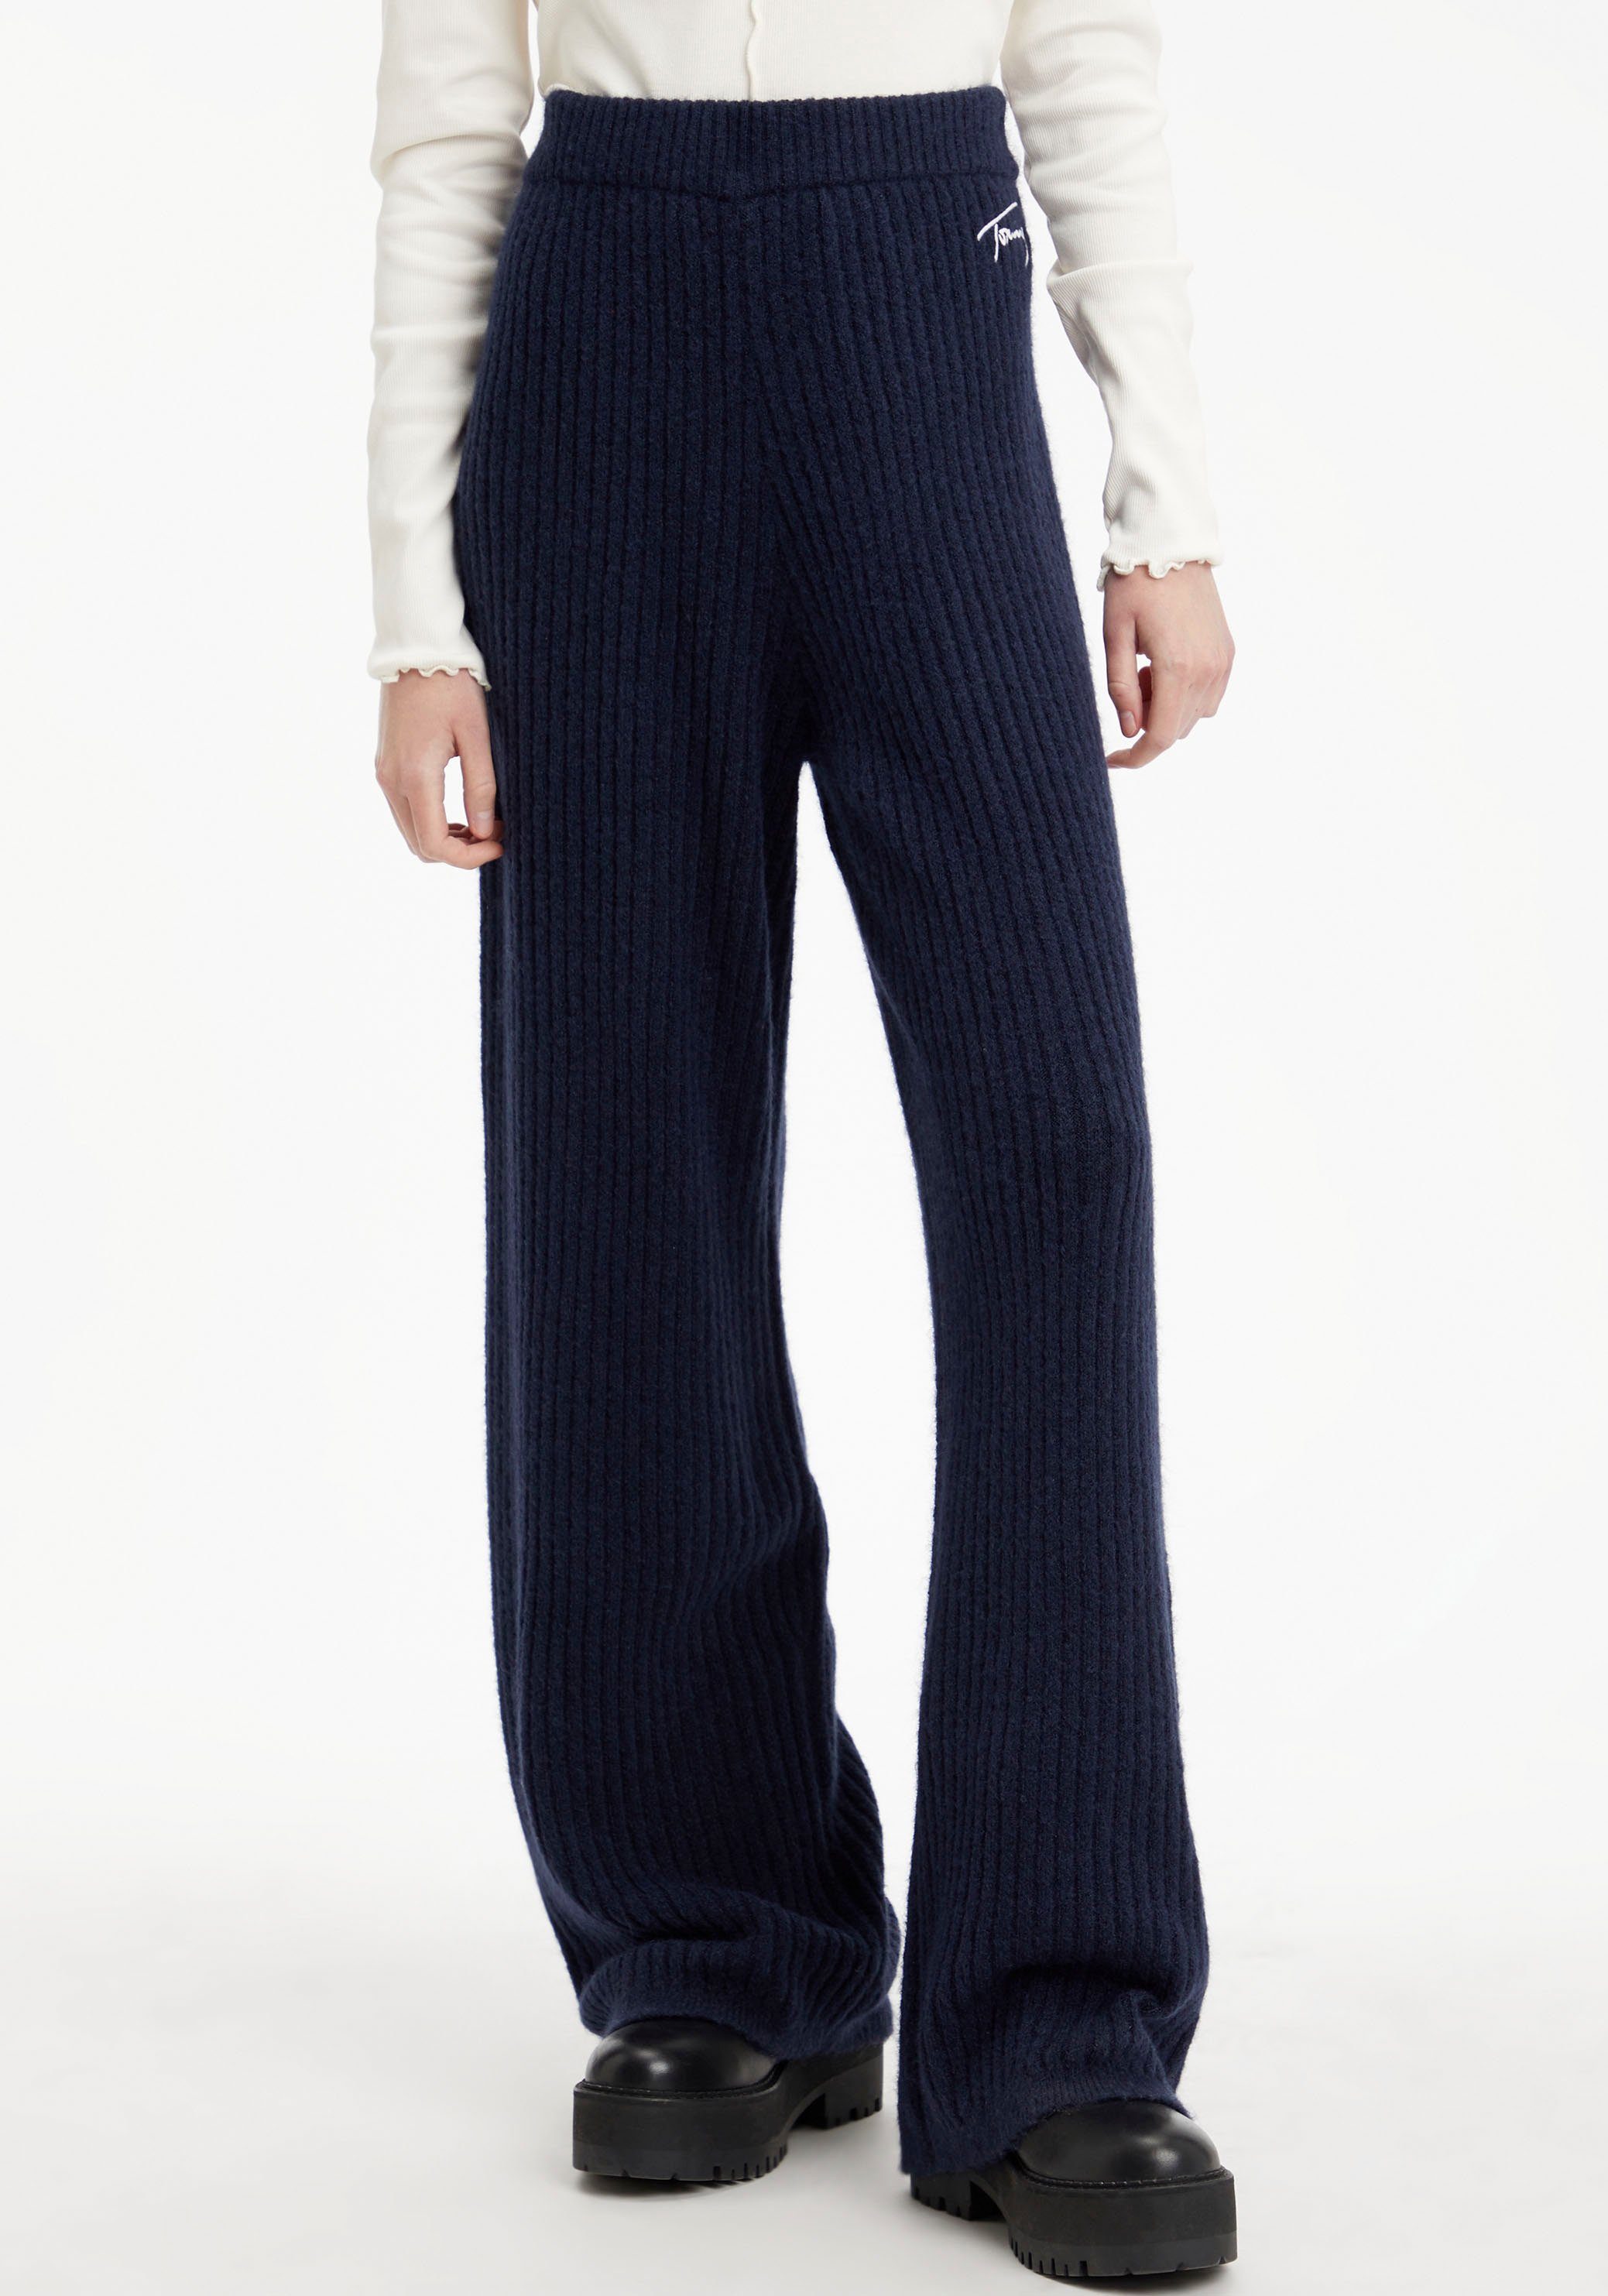 COSY Rippoptik Tommy in SIGNATURE & SWEATER Jeans mit Loungehose TJW Jeans Logo-Flag PANT Tommy